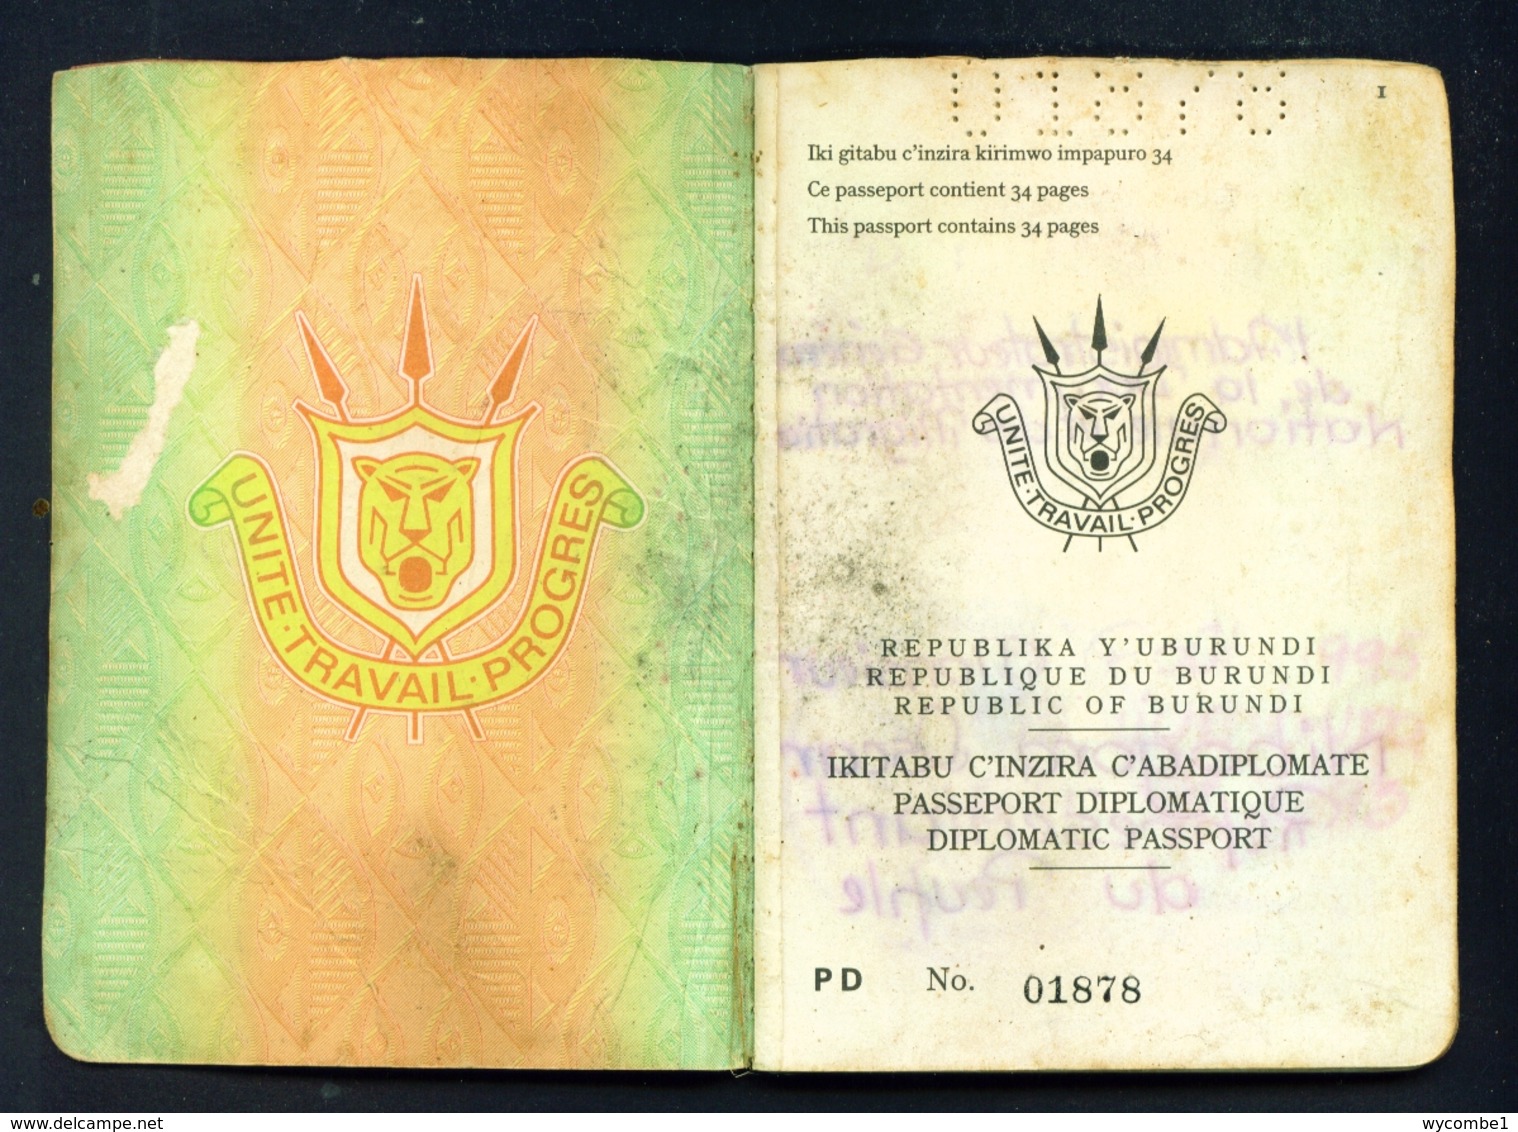 BURUNDI - Expired Diplomatic Passport. Damaged Cover. All Used Visa Pages Scanned - Historische Documenten